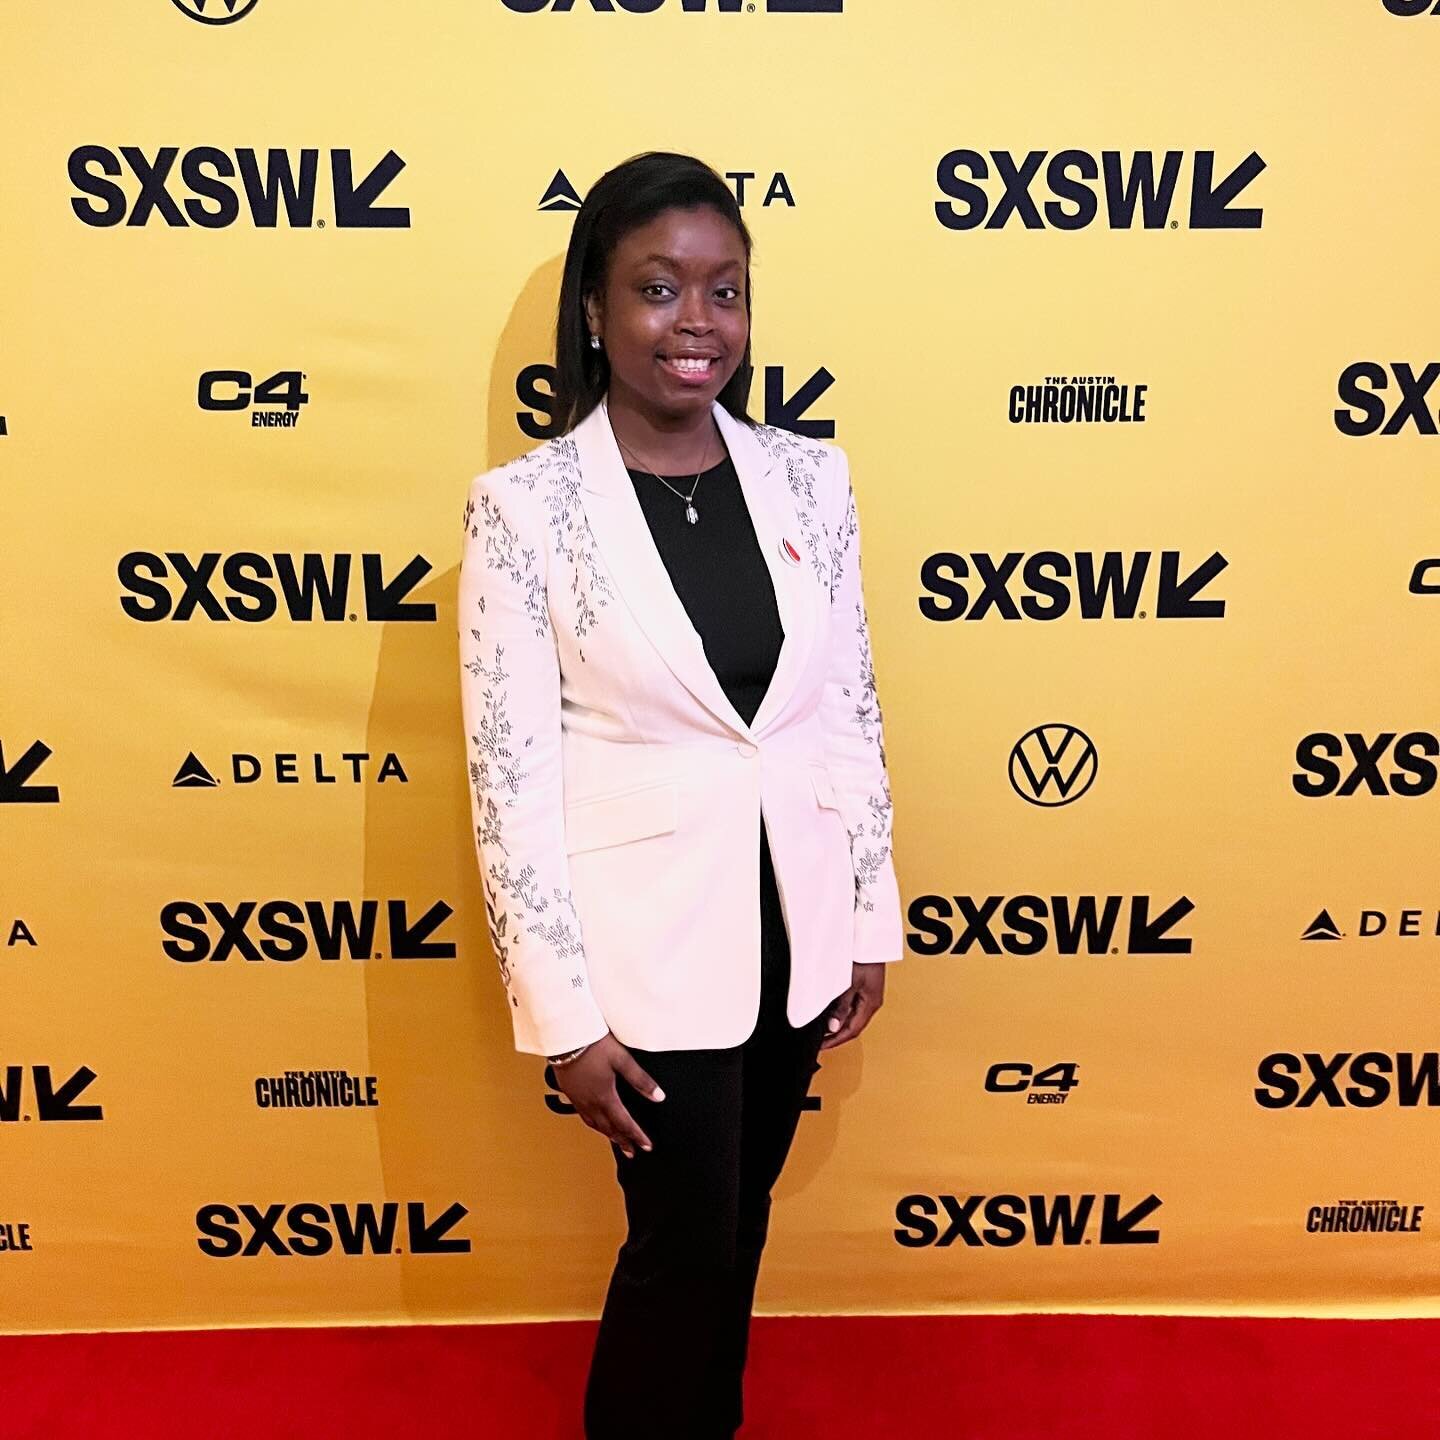 Ramadan America &amp; &ldquo;The Eid Gift&rdquo; appreciation post 💚

Had a show-stopping screening of Ramadan America at The Muslim House @ SXSW!! It was an amazing event that proves there is a HUGE appetite for Muslim stories out there 🙏🏾🌙

Sho